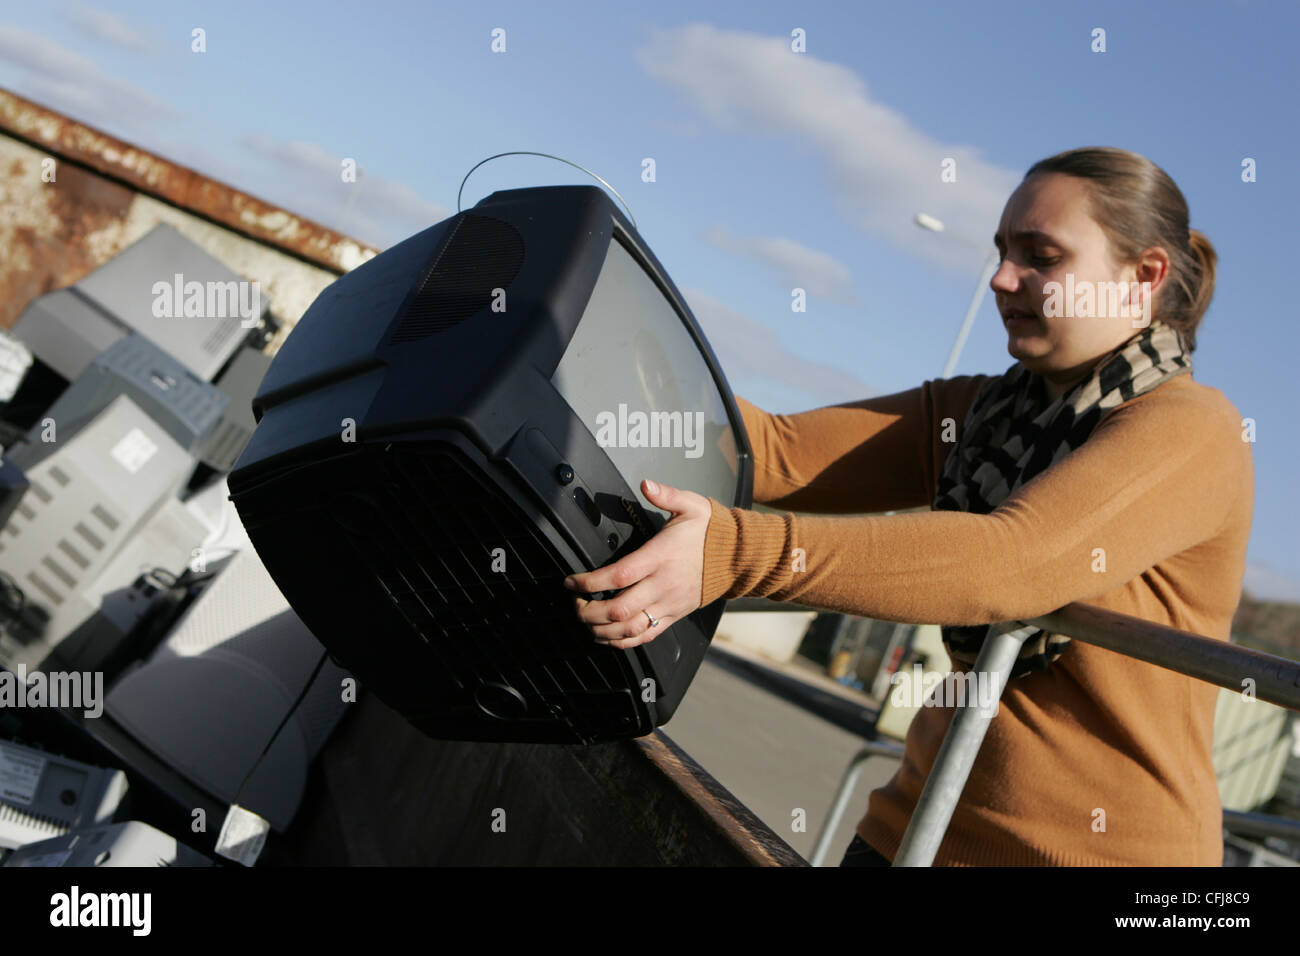 woman throws a crt tv into skip at landfill site Stock Photo